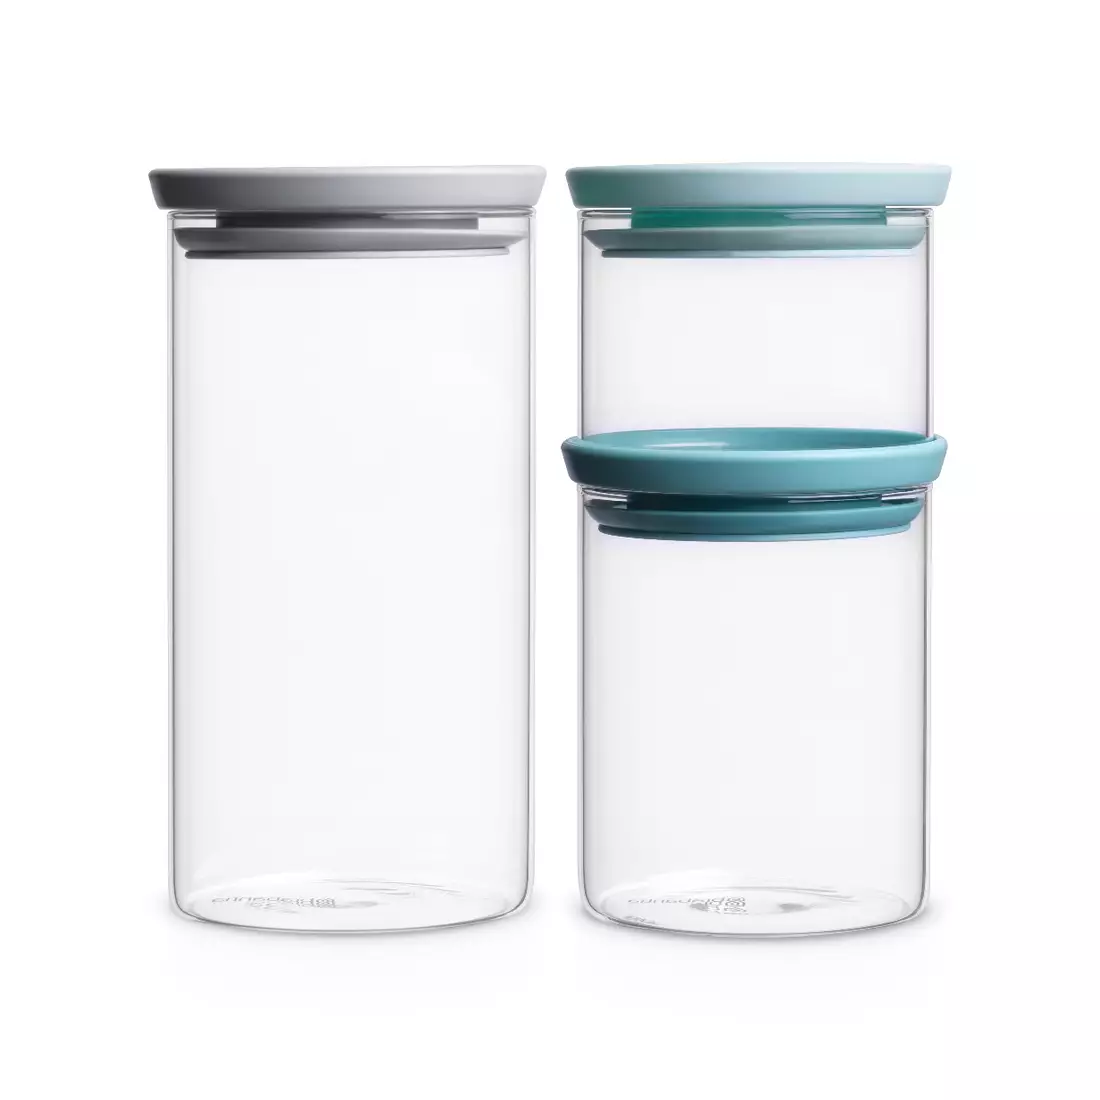 BRABANTIA set of glass containers 3 pcs.